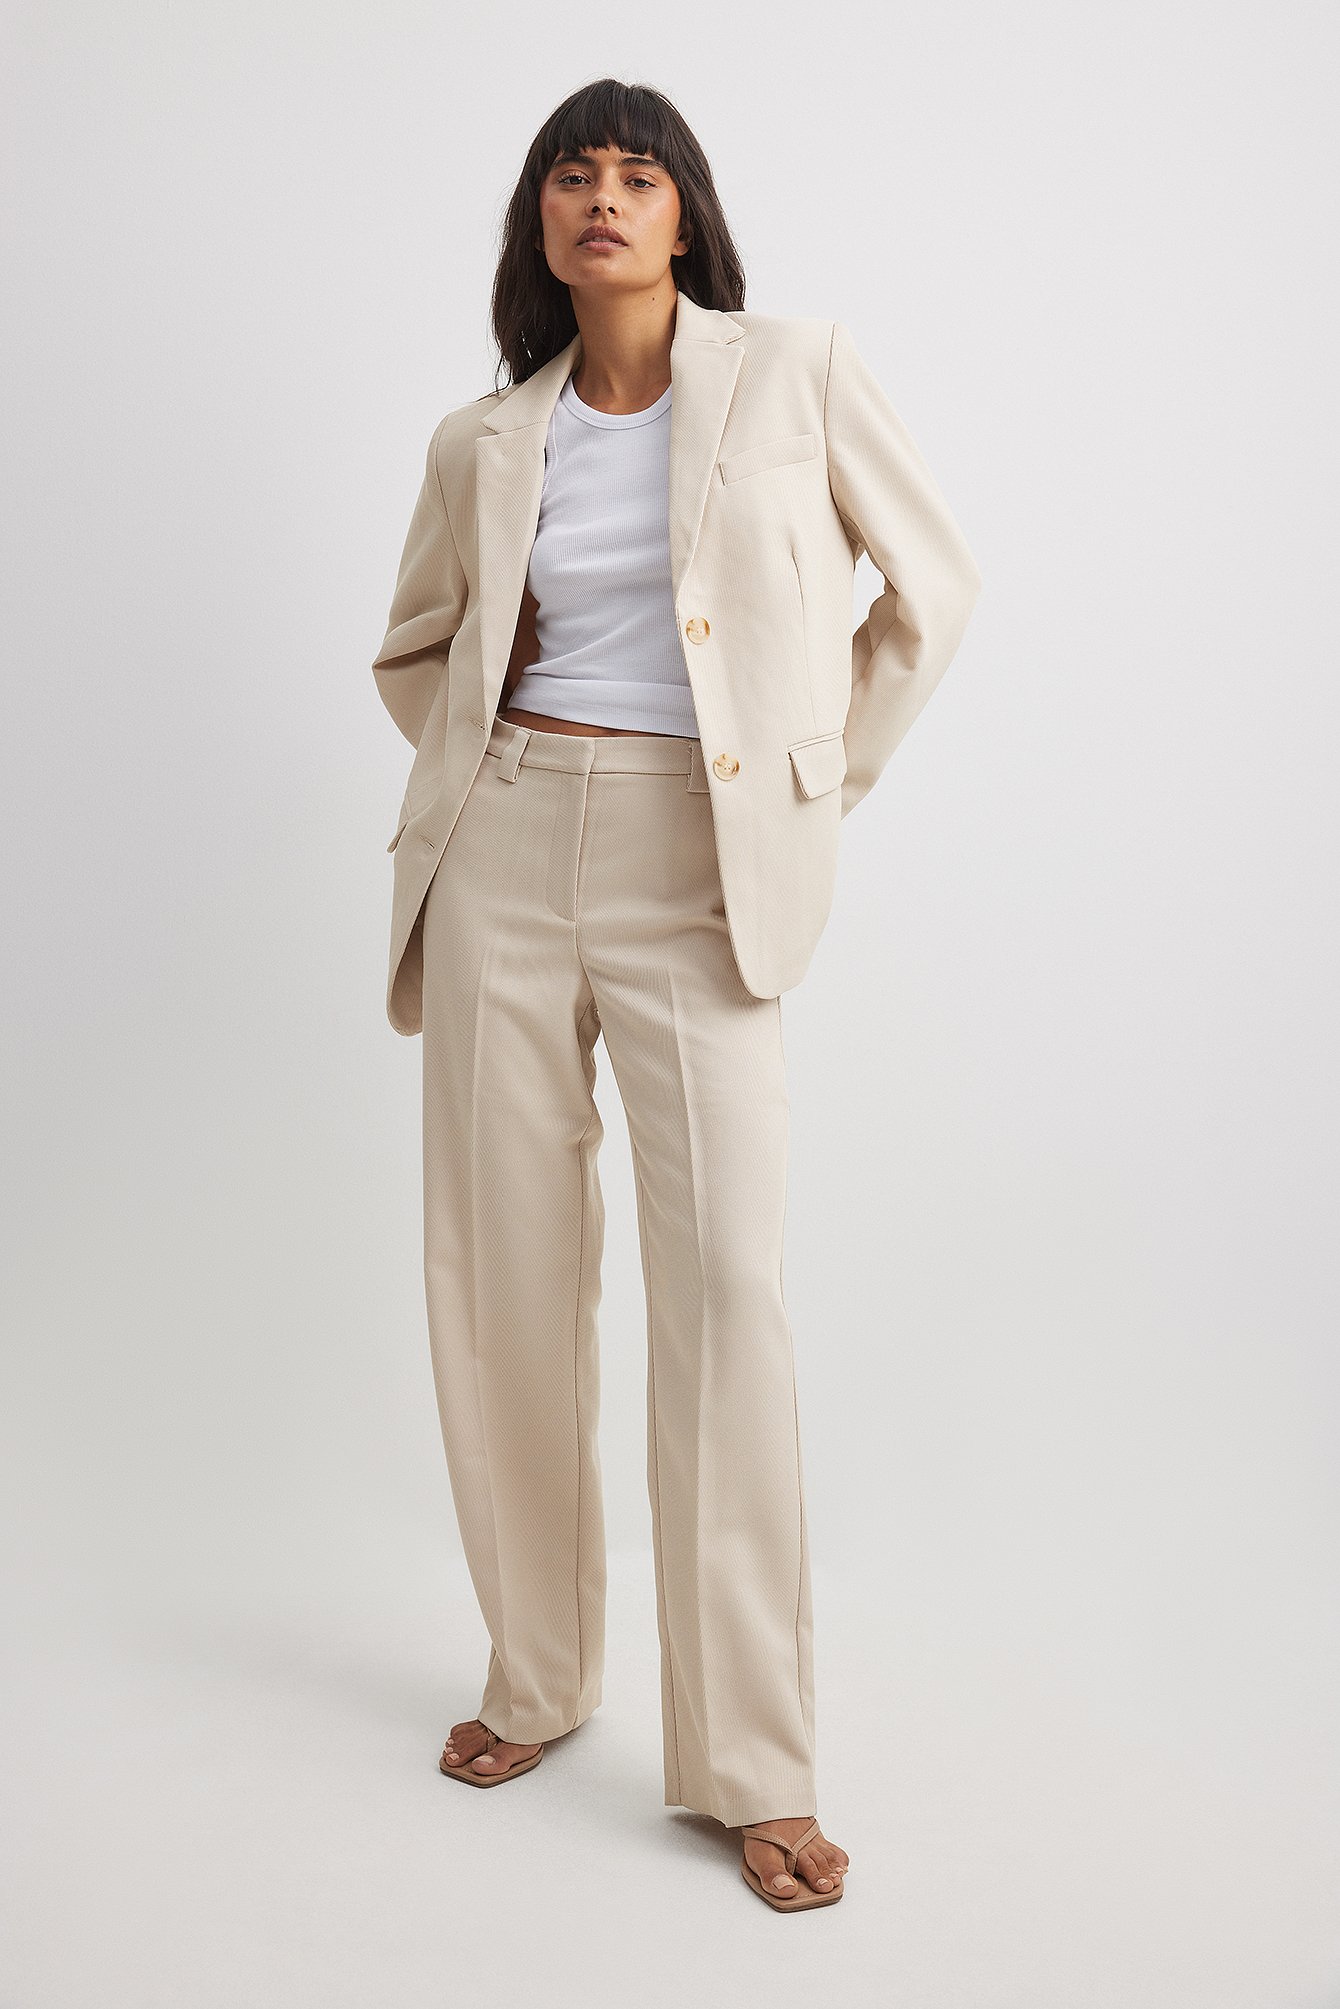 Guide to Women's Suits